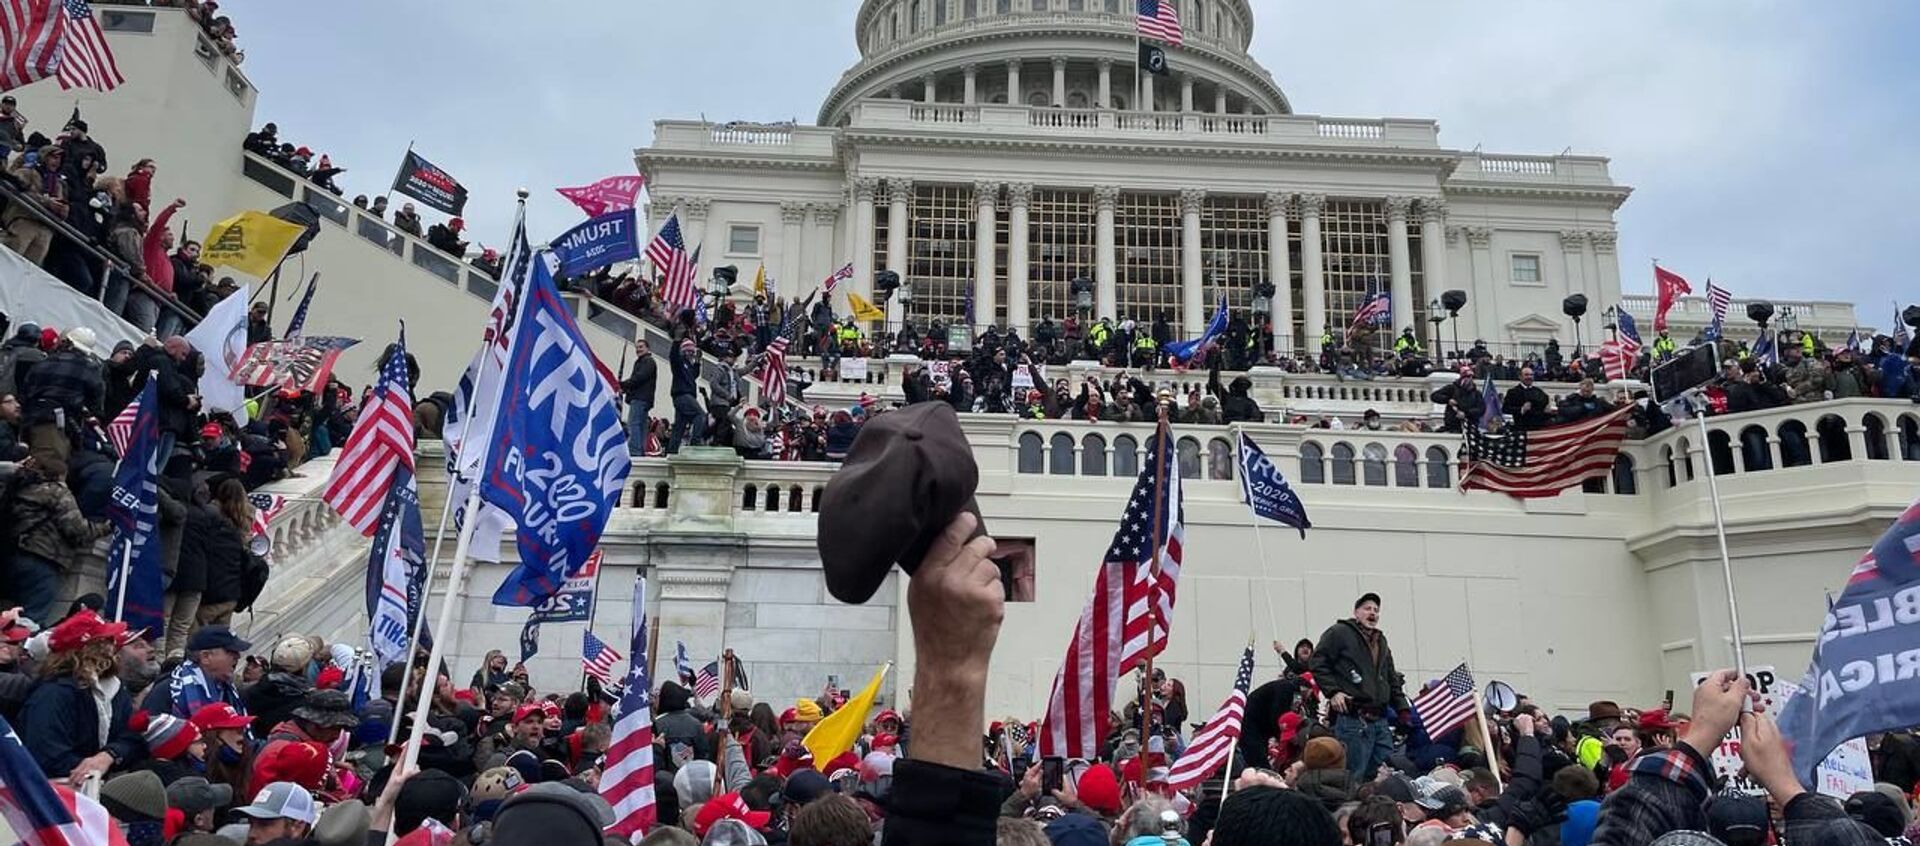 Demonstrators protest outside US Capitol Building in Washington to contest the certification of the 2020 presidential election results by the US Congress, 6 January 2021 - Sputnik International, 1920, 17.03.2021